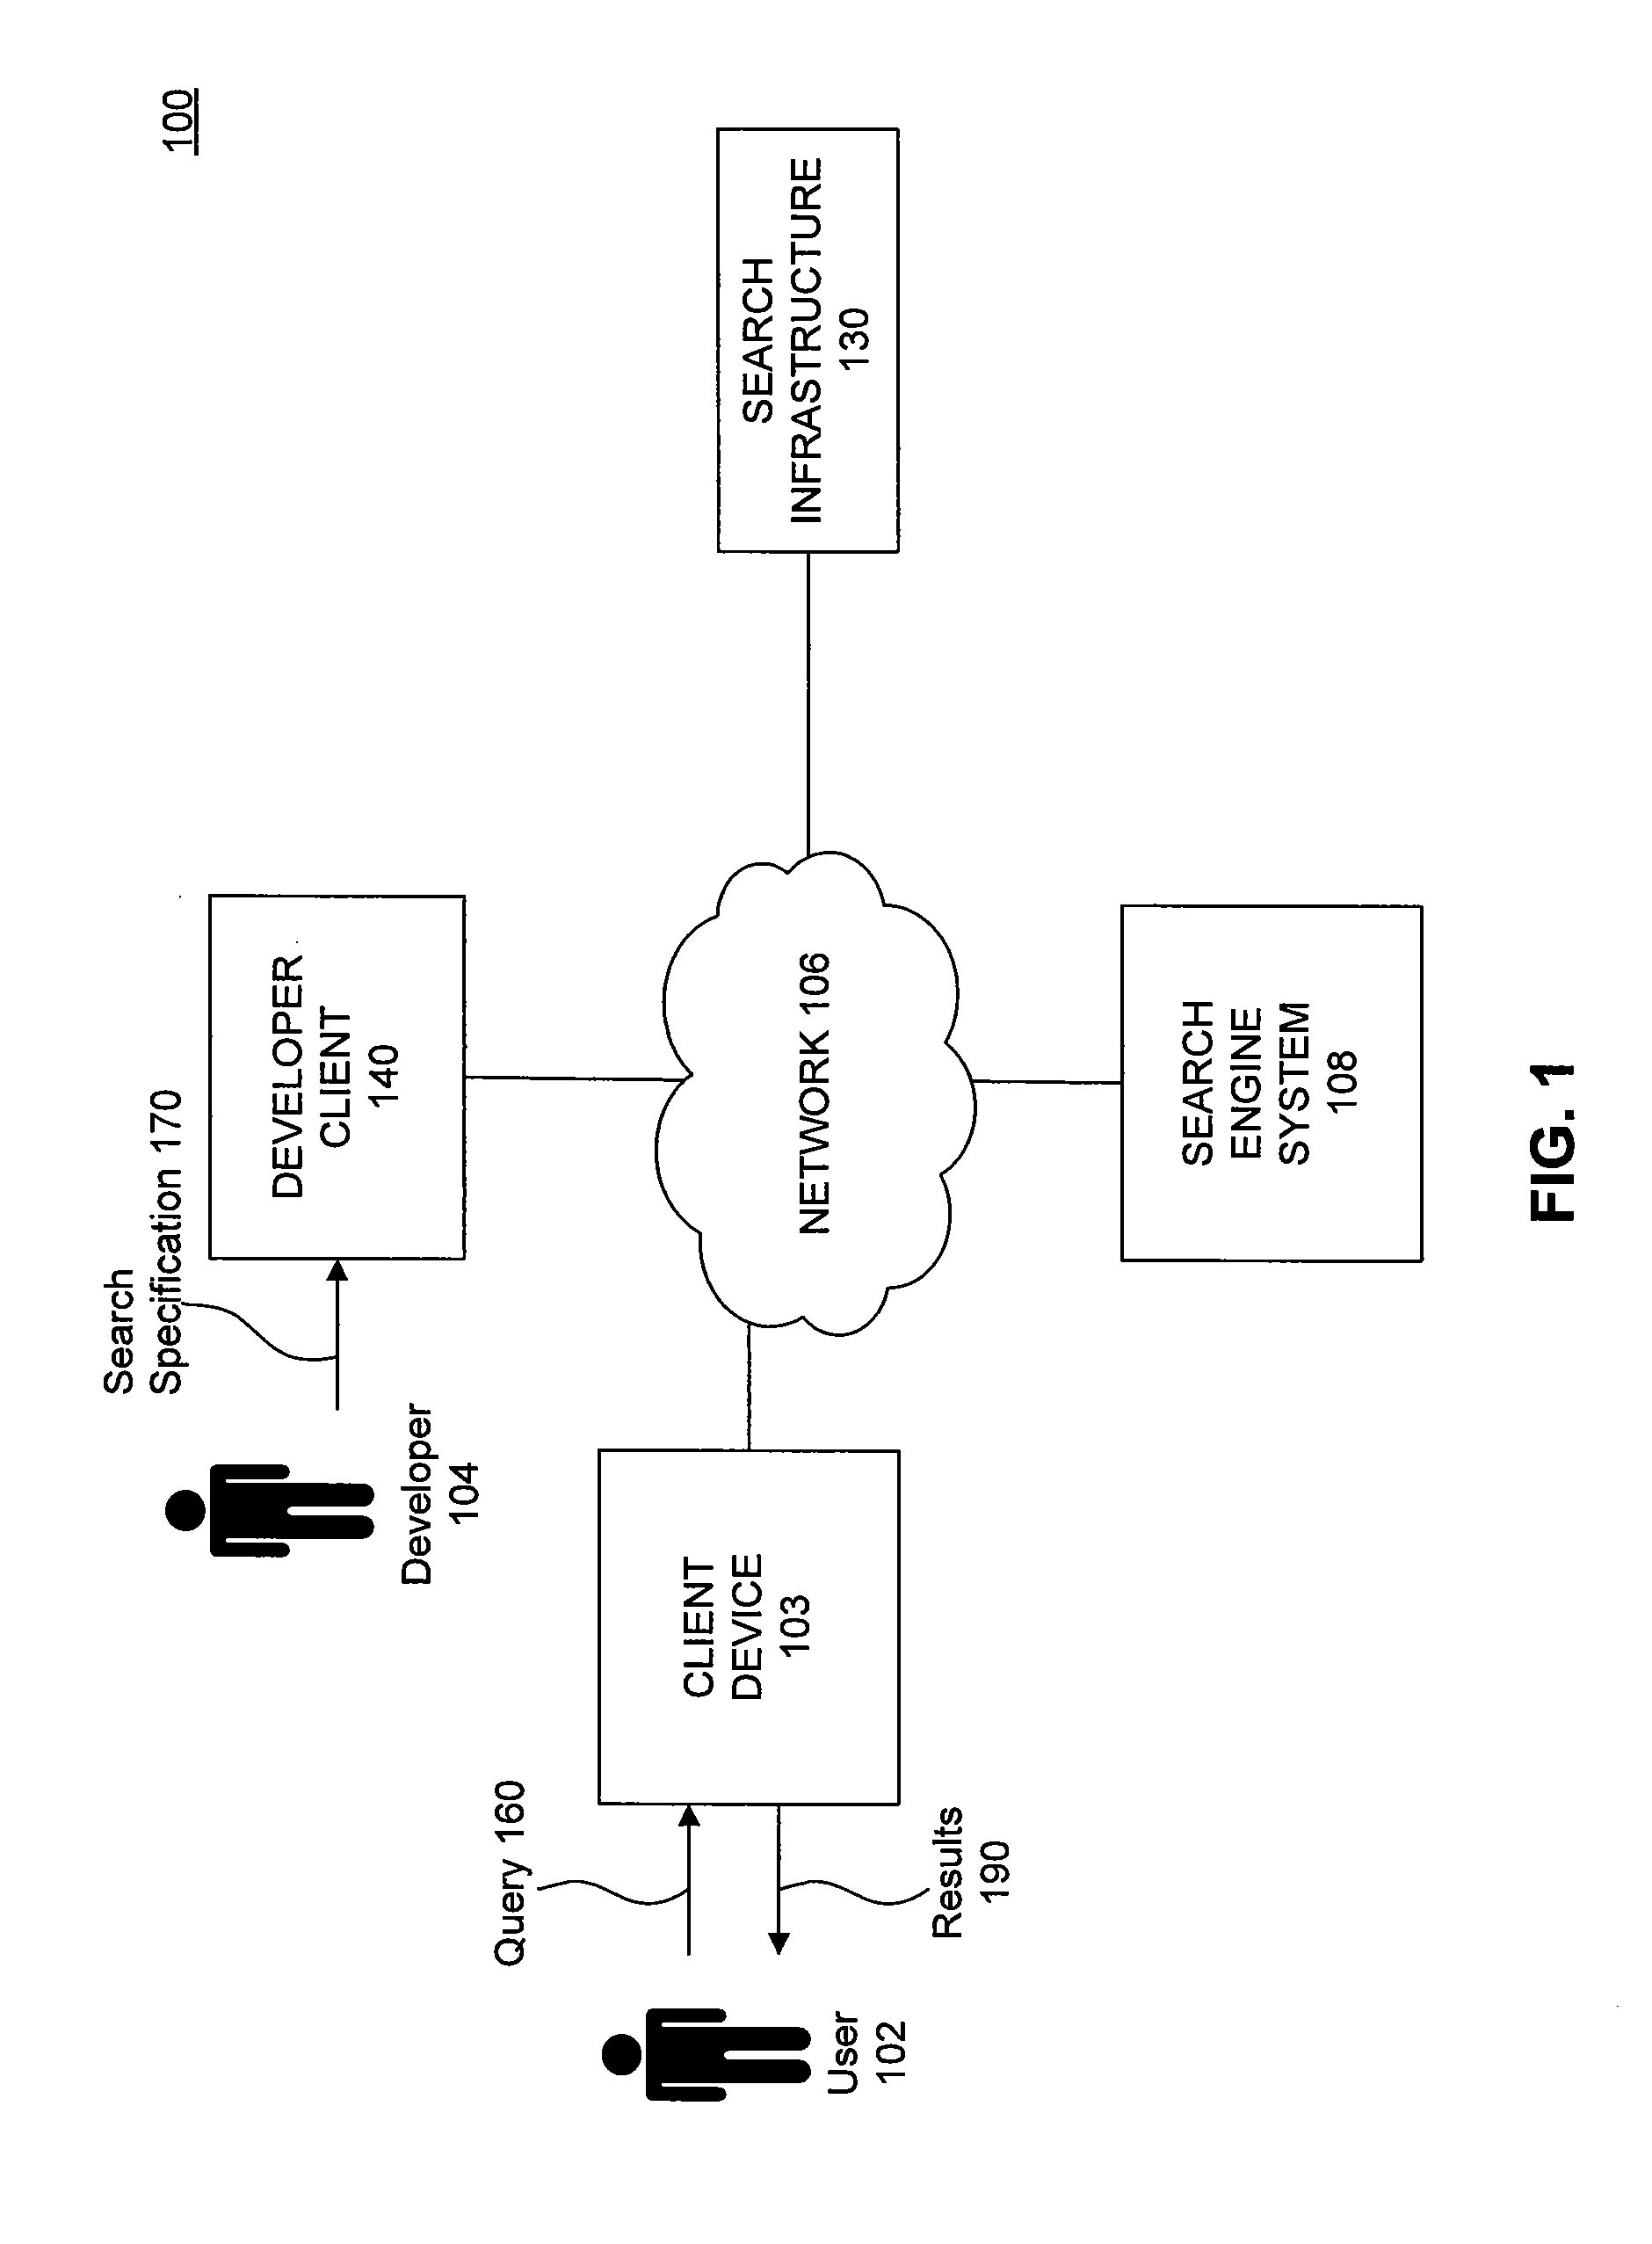 System and method for query re-issue in search engines